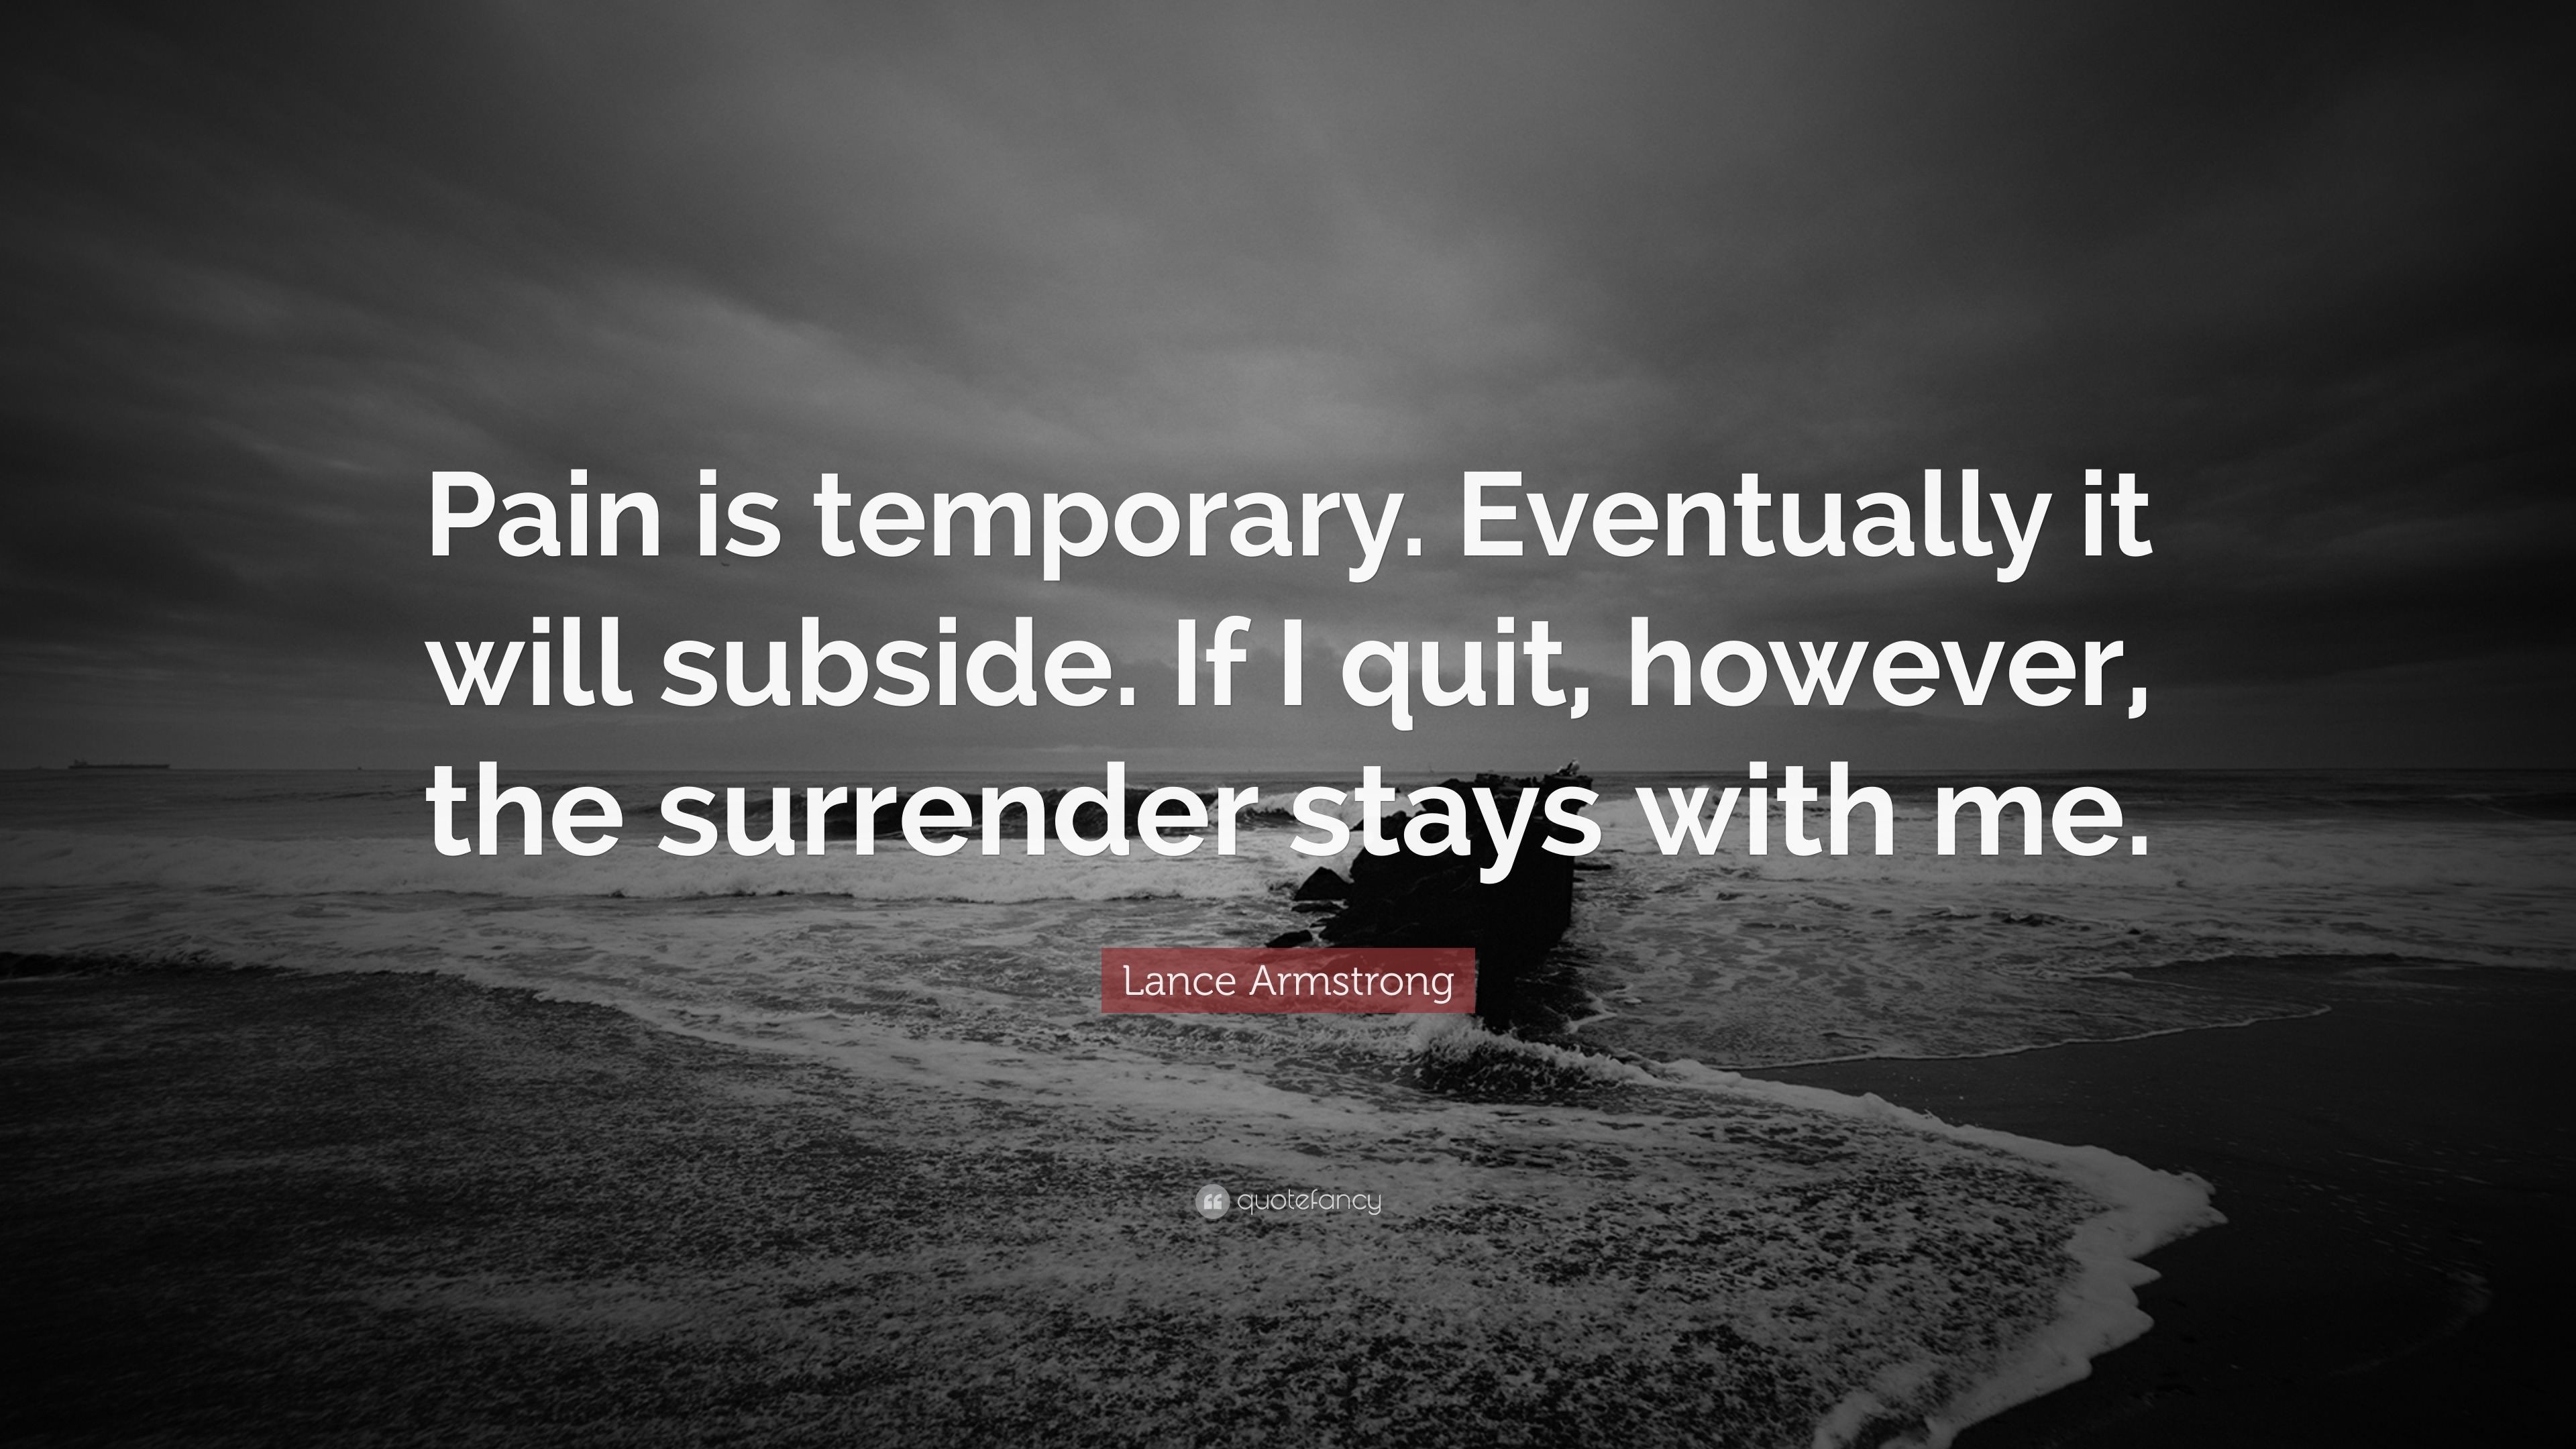 Lance Armstrong Quote: “Pain is temporary. Eventually it will subside